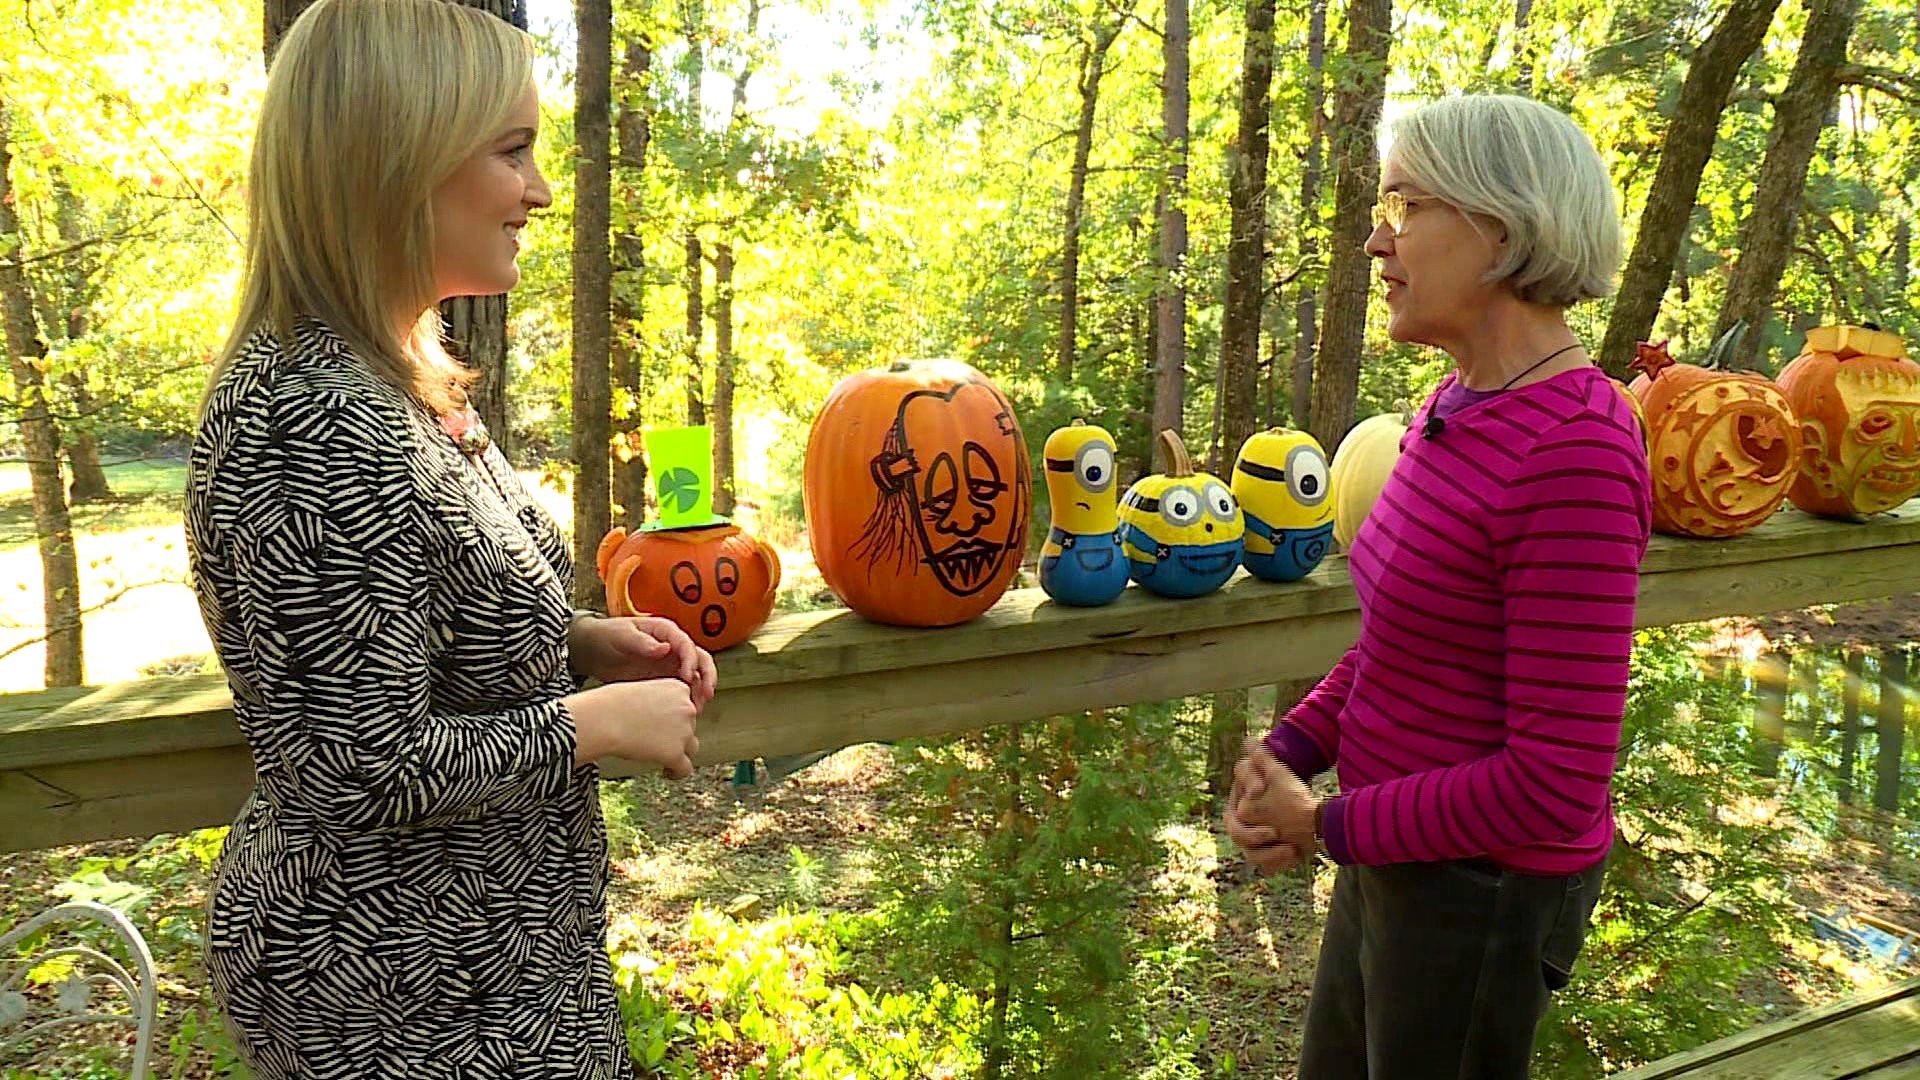 WEB EXCLUSIVE: Pumpkin Decorating Tips For Every Age